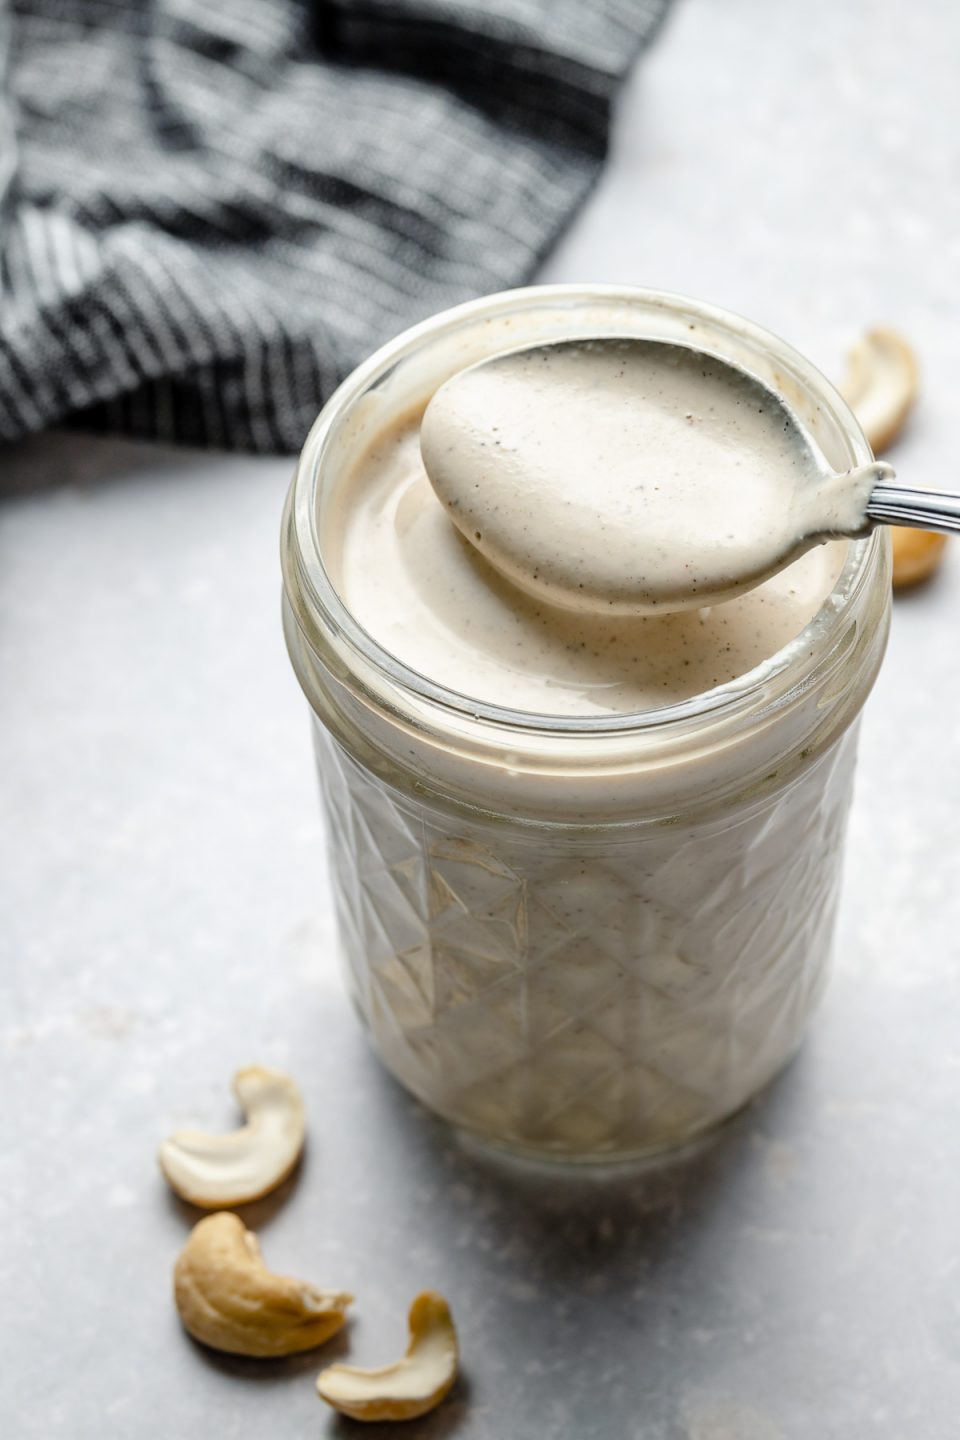 An overhead and angled shot of an open mason jar filled with Vegan Cashew Crema sits on top of a light blue surface. A spoon has been dipped into the vegan crema and a spoonful is hovering over the mason jar. A blue & white striped linen napkin rests on the surface in the background & raw cashews surround the jar of crema.